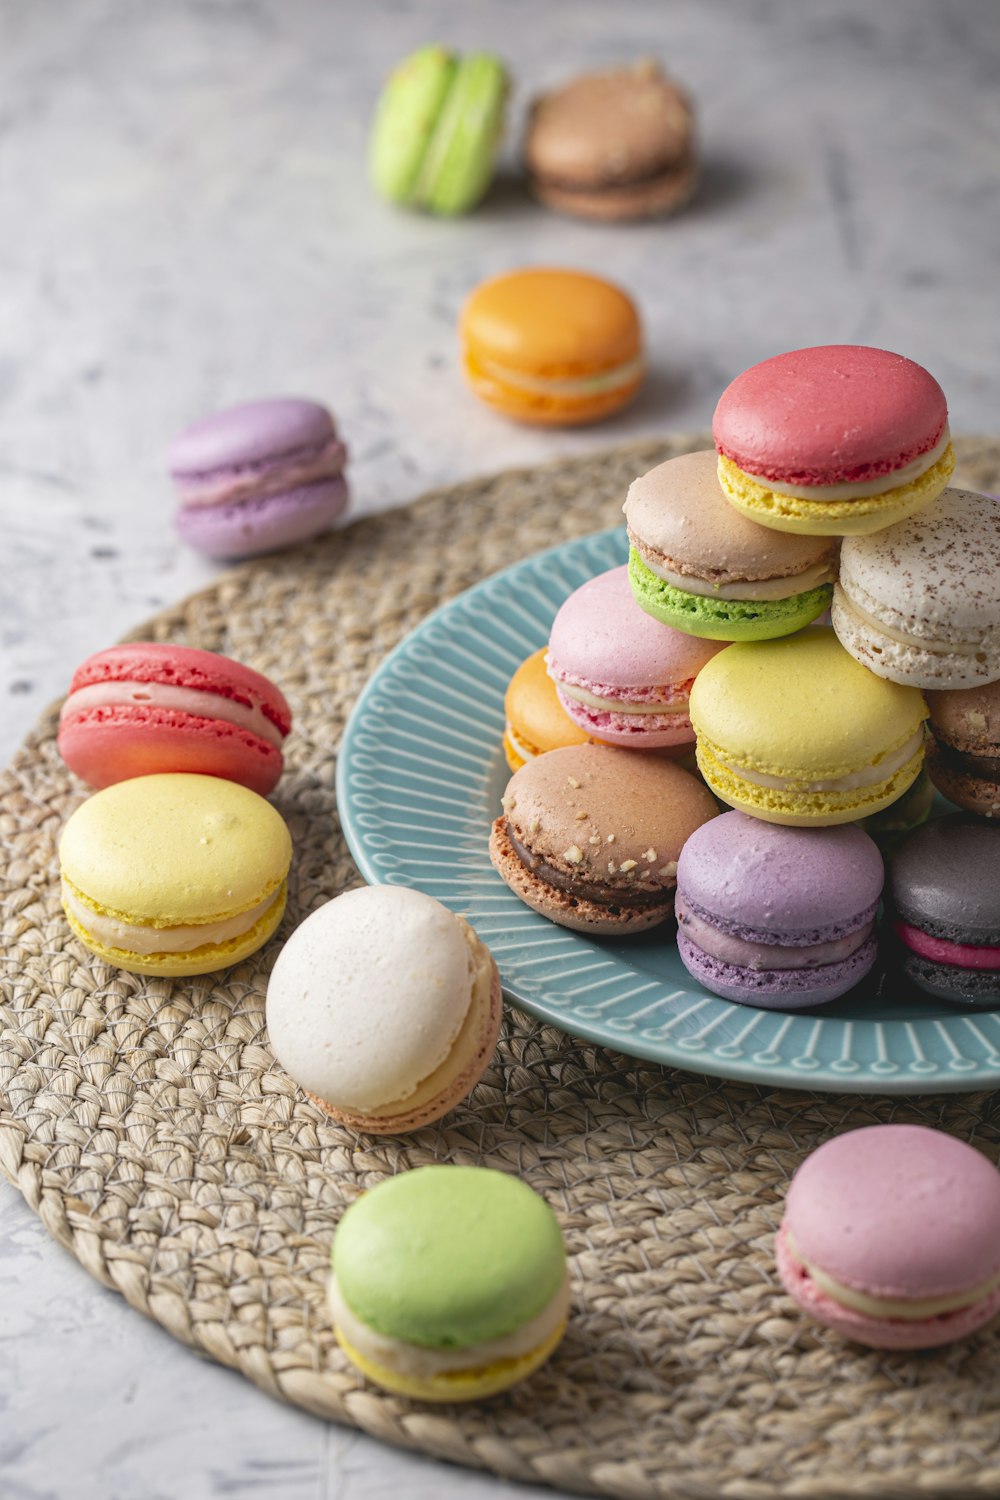 a plate of colorful macaroons on a table